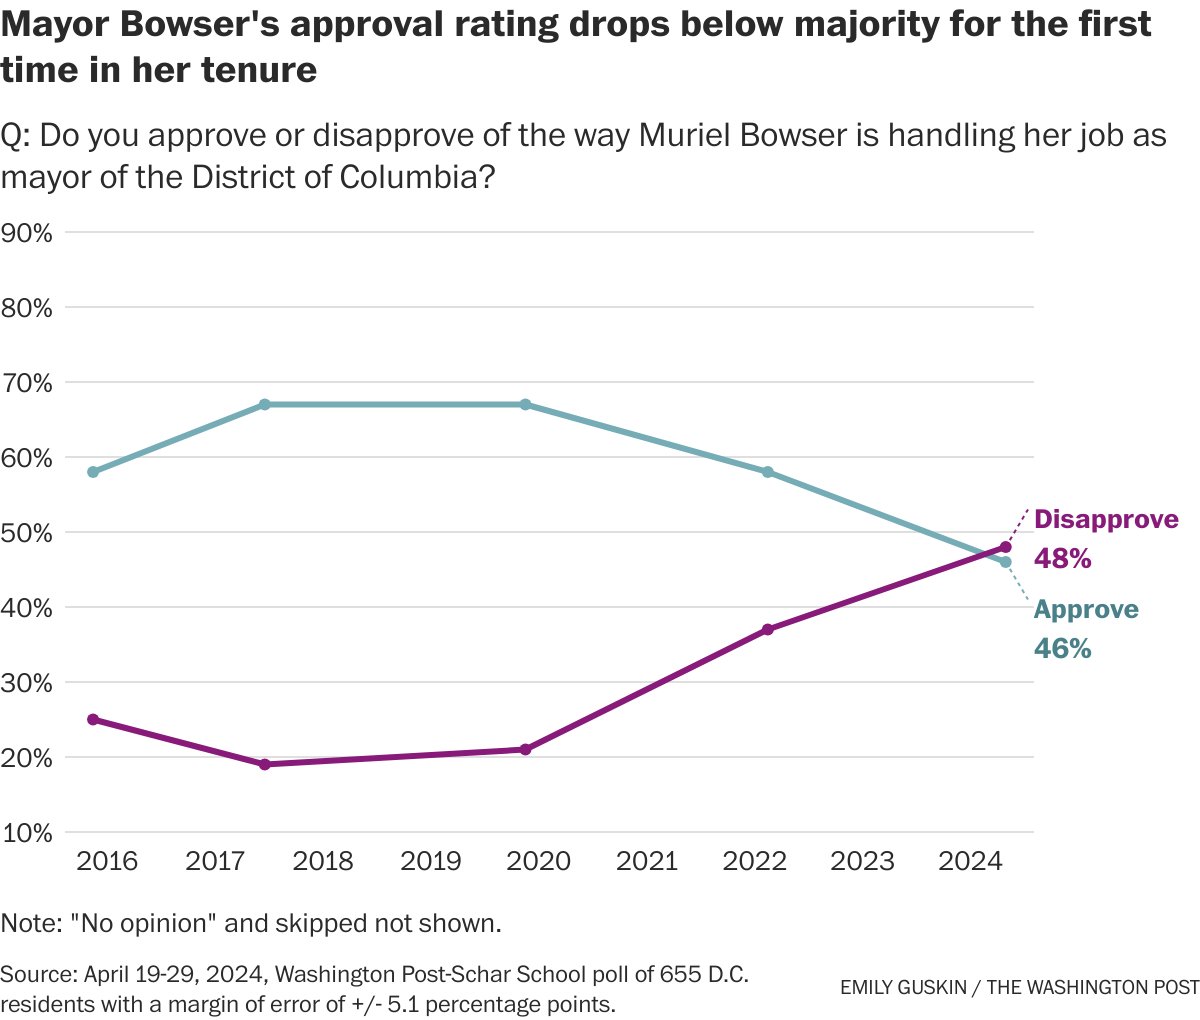 New this AM: D.C. Mayor Bowser’s approval rating drops to 46% in @washingtonpost - @ScharSchool poll, down from 58% in 2022 and 67% in 2017. Full story from @TheArtist_MBS @Meagan_Flynn @EmGusk @dtkeating washingtonpost.com/dc-md-va/2024/…